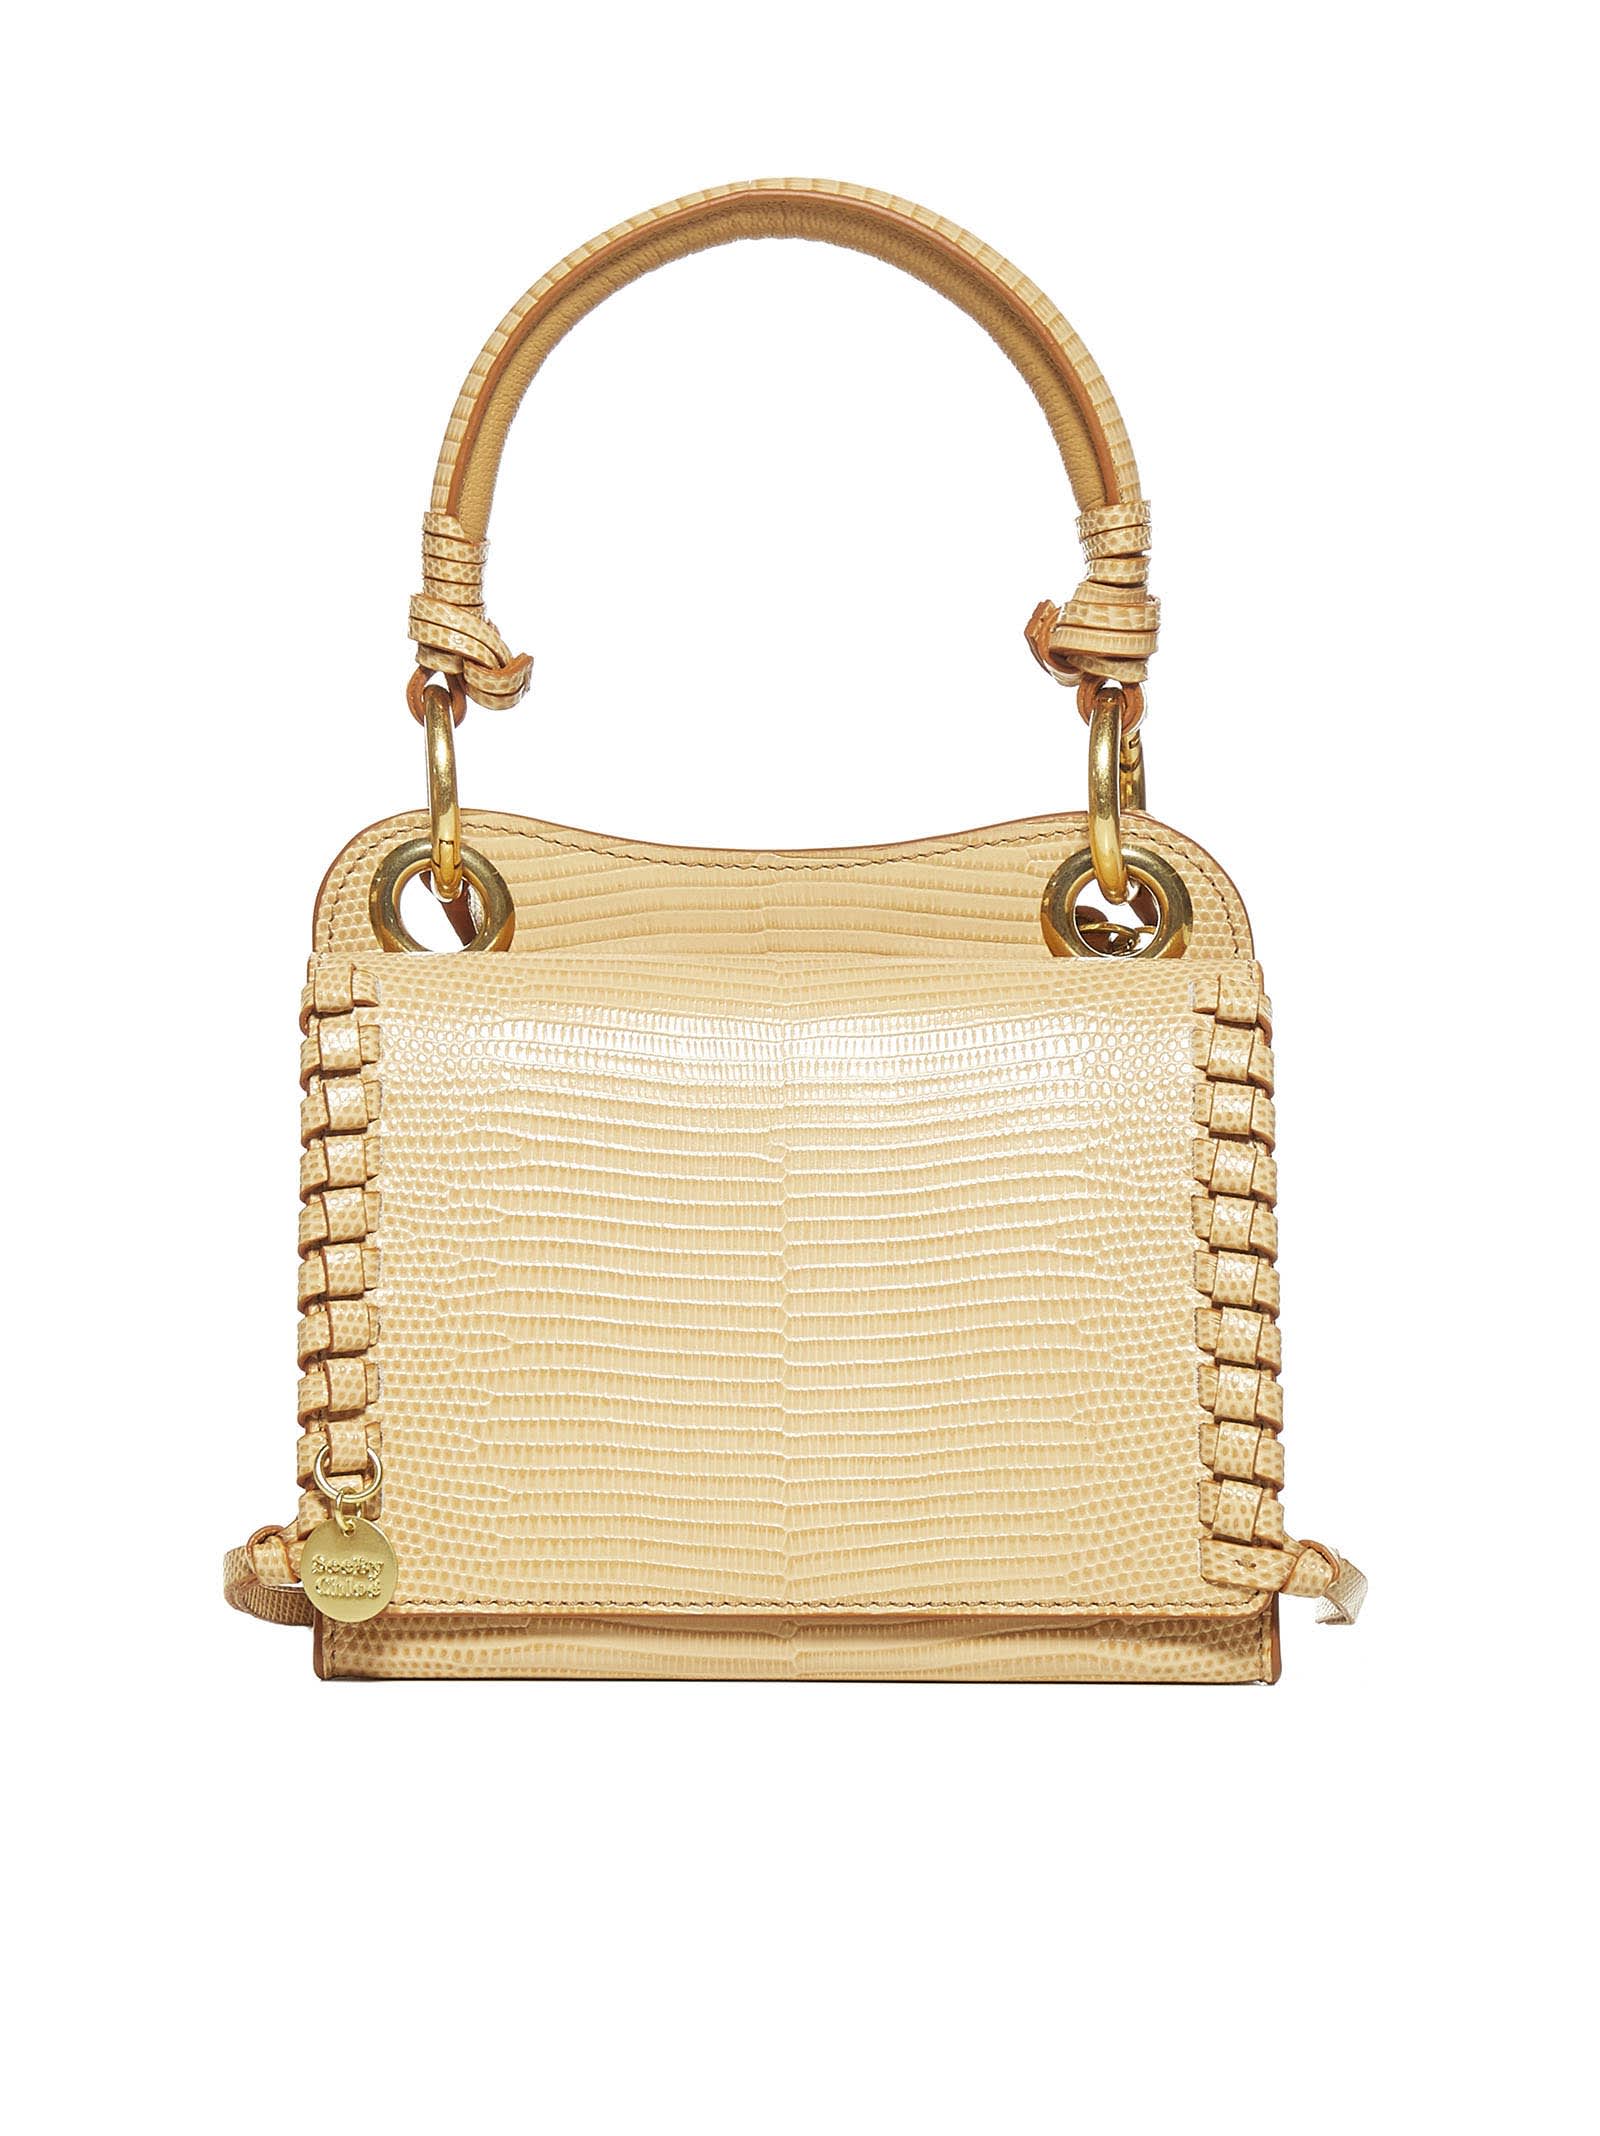 SEE BY CHLOÉ TILDA MINI LEATHER AND SUEDE BAG